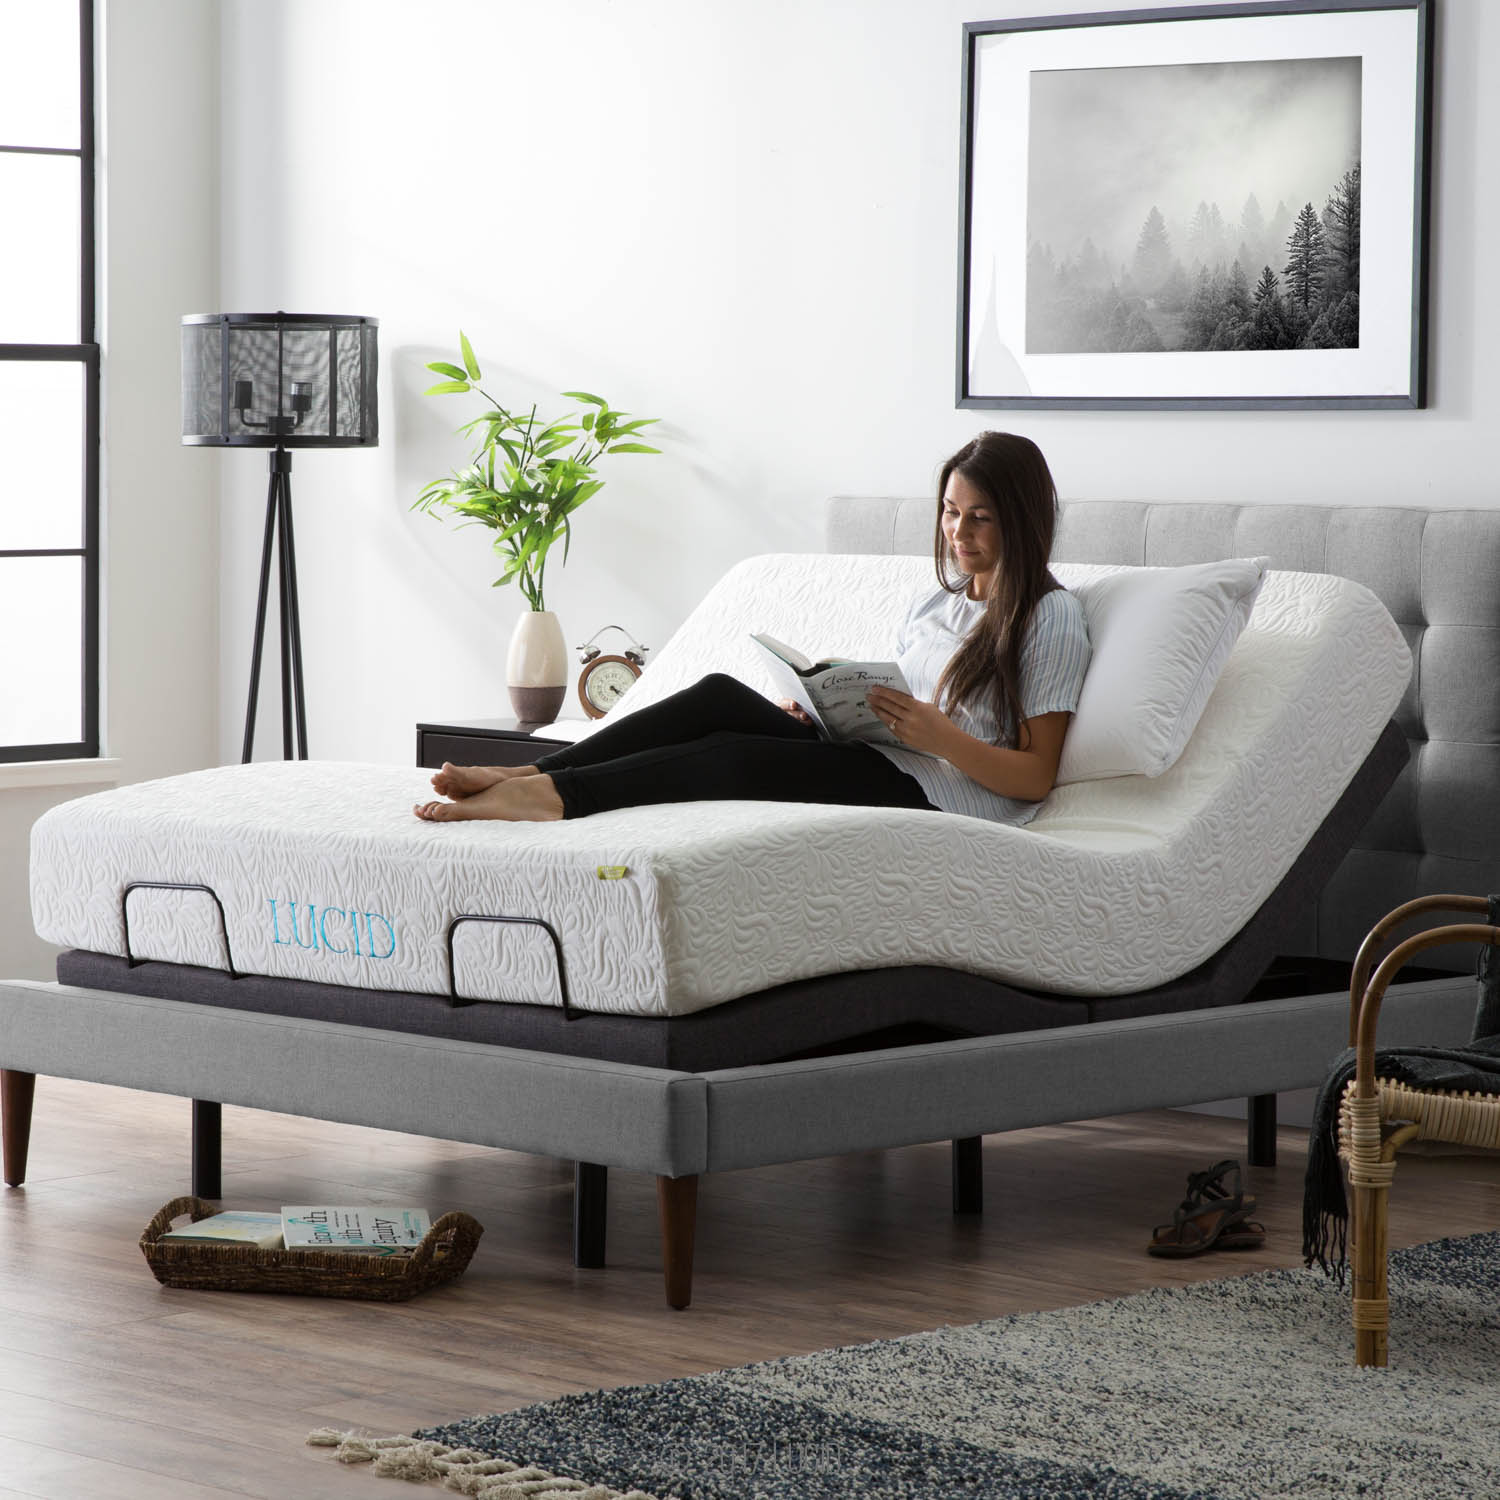 What to Know Before Buying an Adjustable Bed